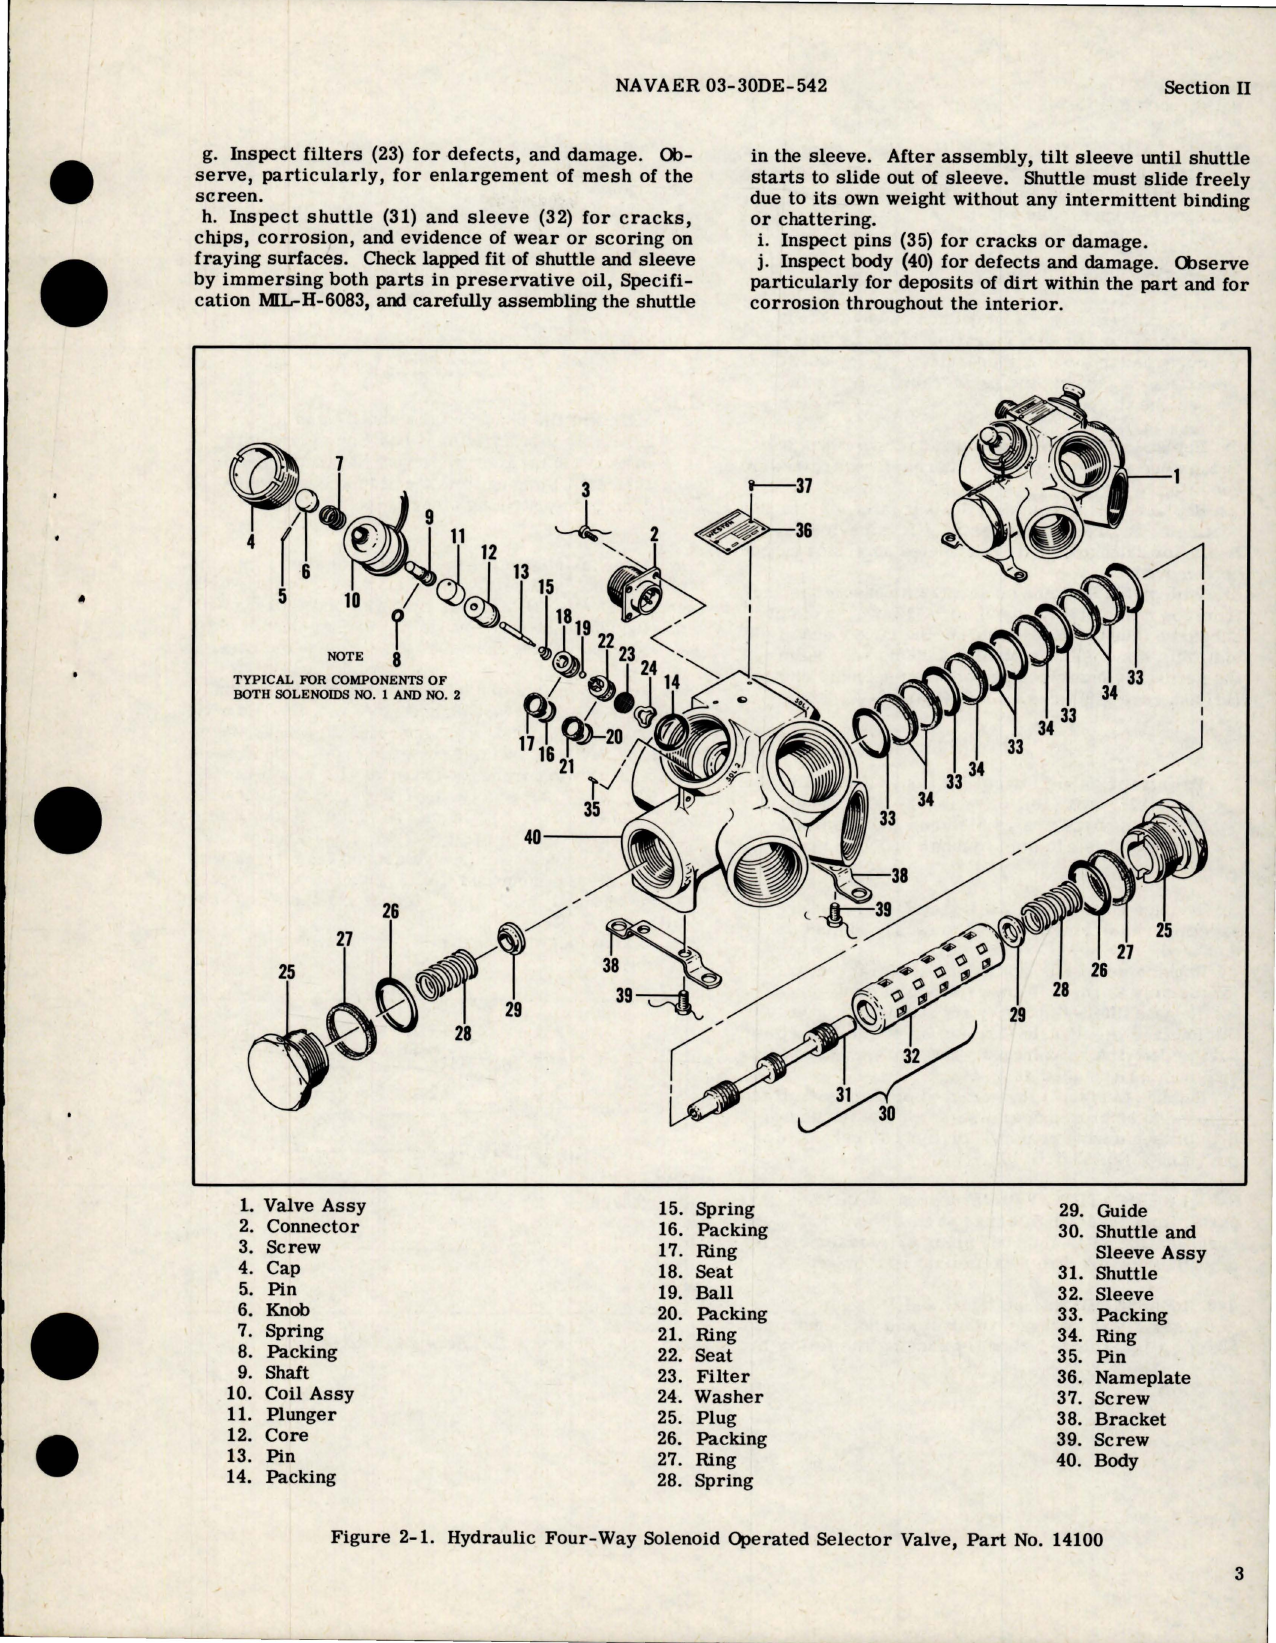 Sample page 7 from AirCorps Library document: Overhaul Instructions for Hydraulic Four Way Solenoid Operated Selector Valves - Parts 14100 and 15130 